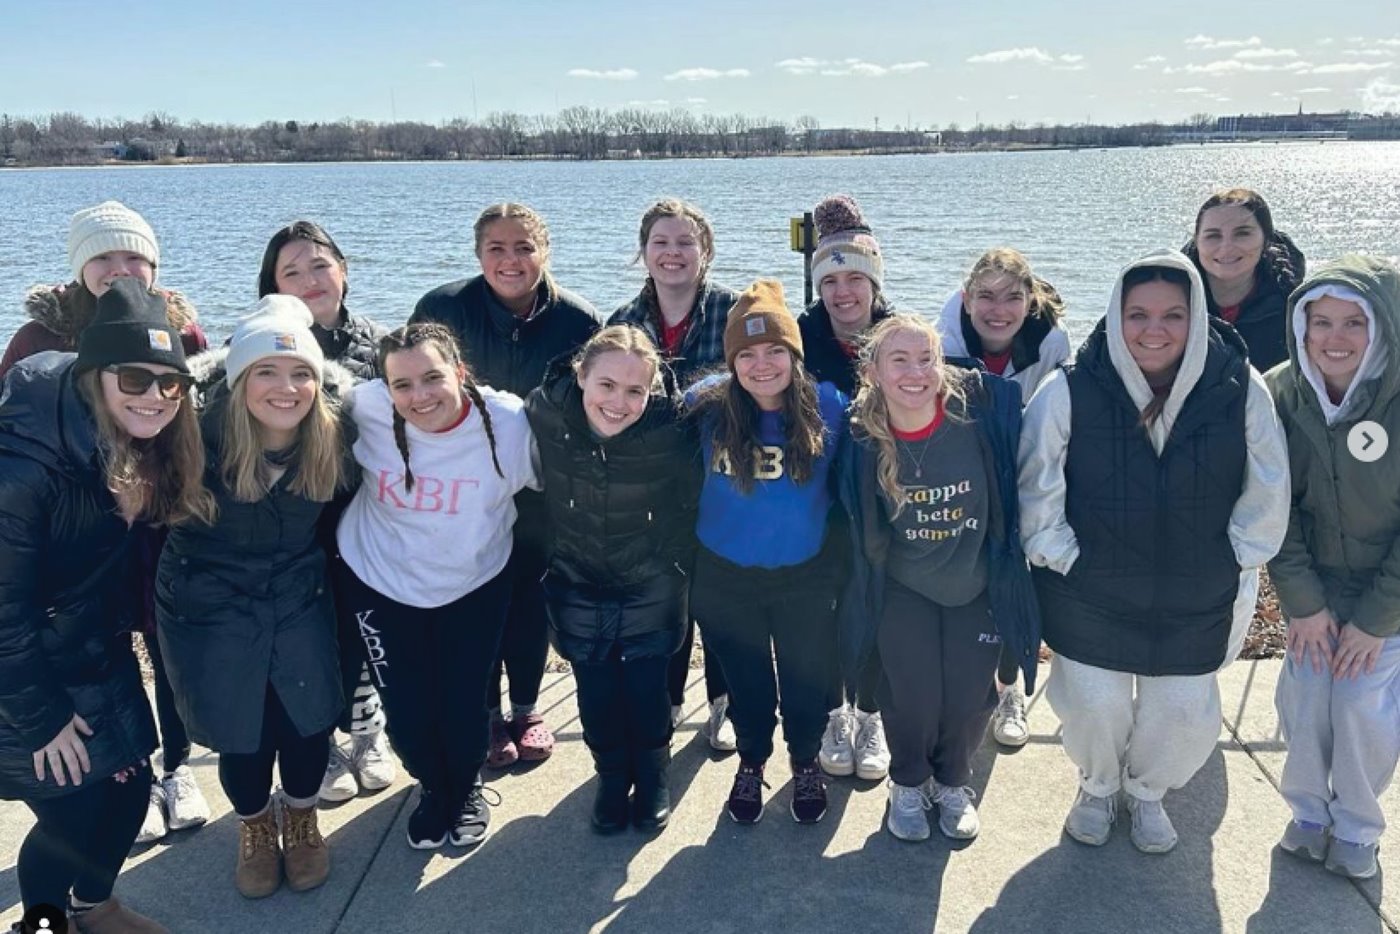 Kappa Beta Gamma members at a Special Olympics event, polar plunge